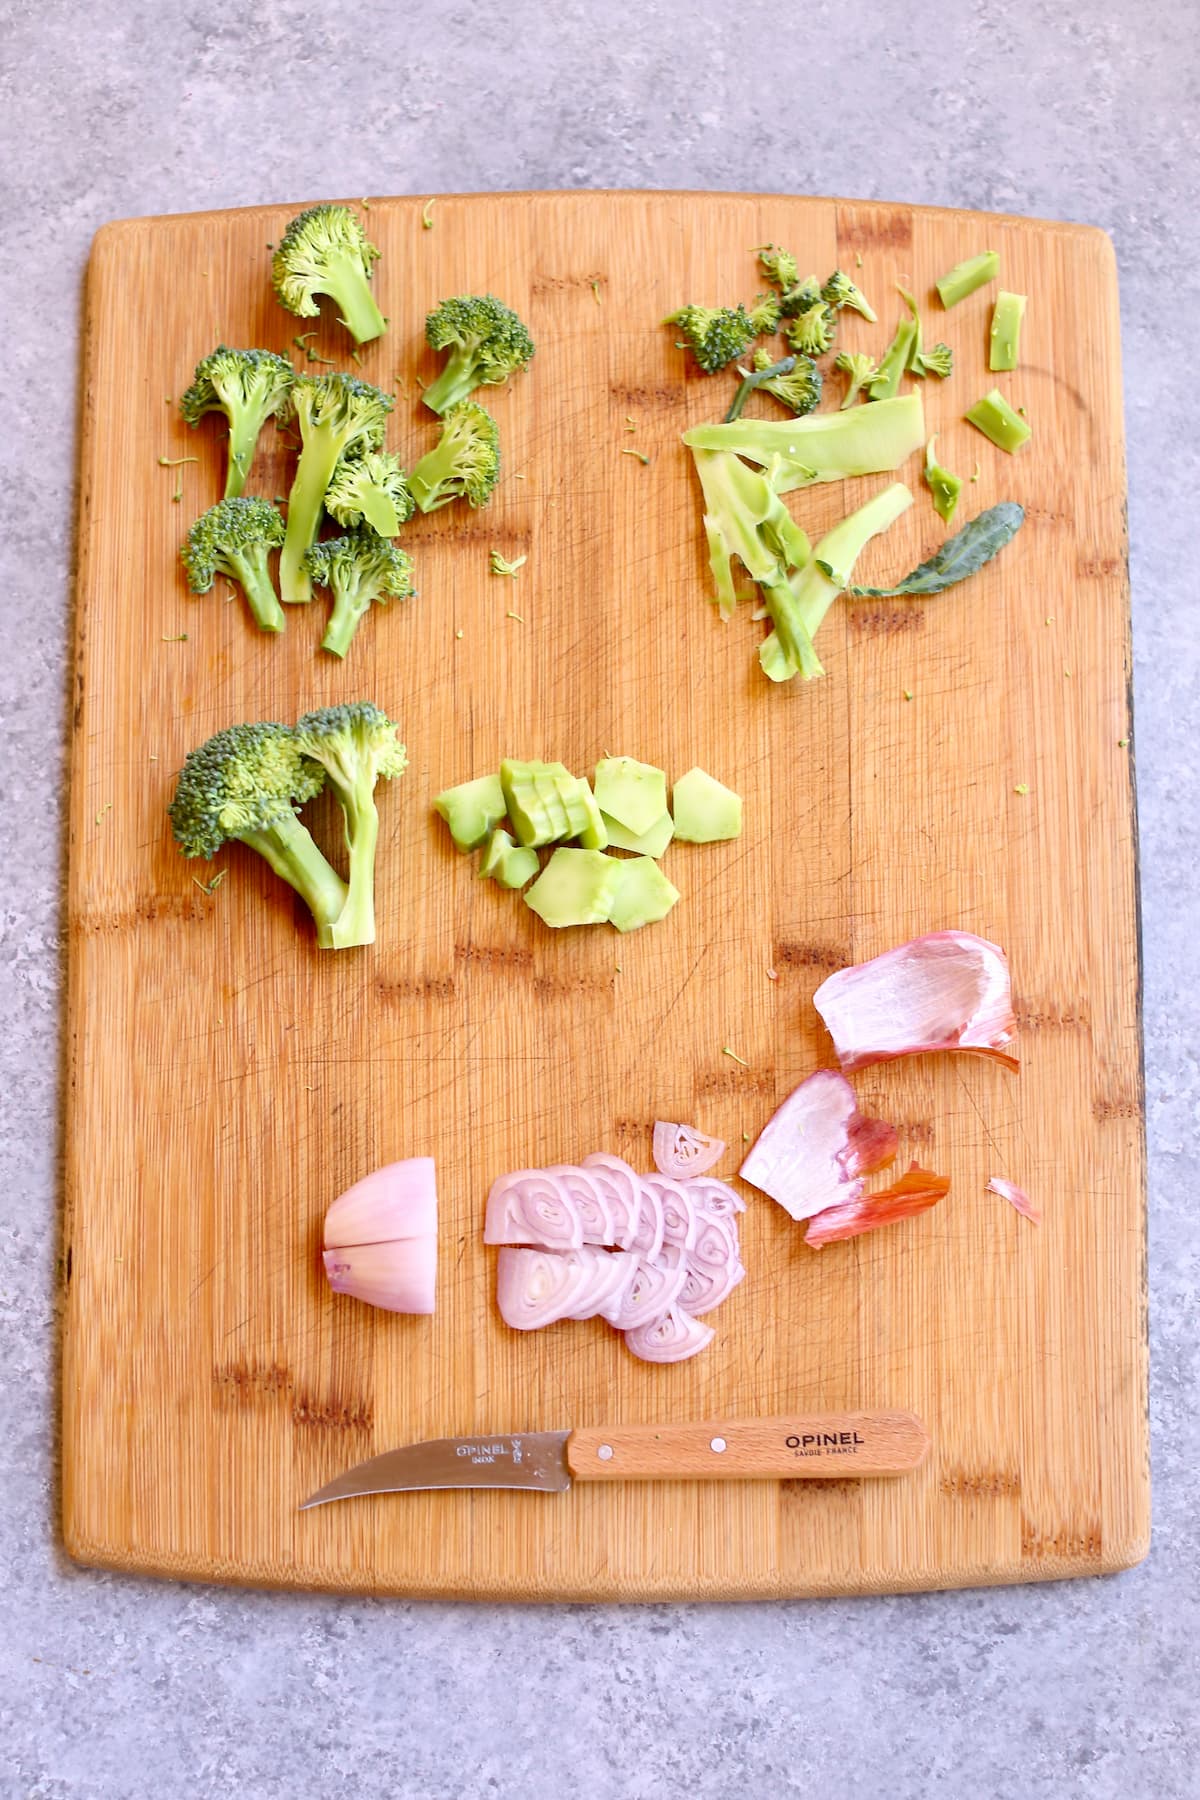 a cutting board with ingredients and knife cut examples for certain vegetables shown.